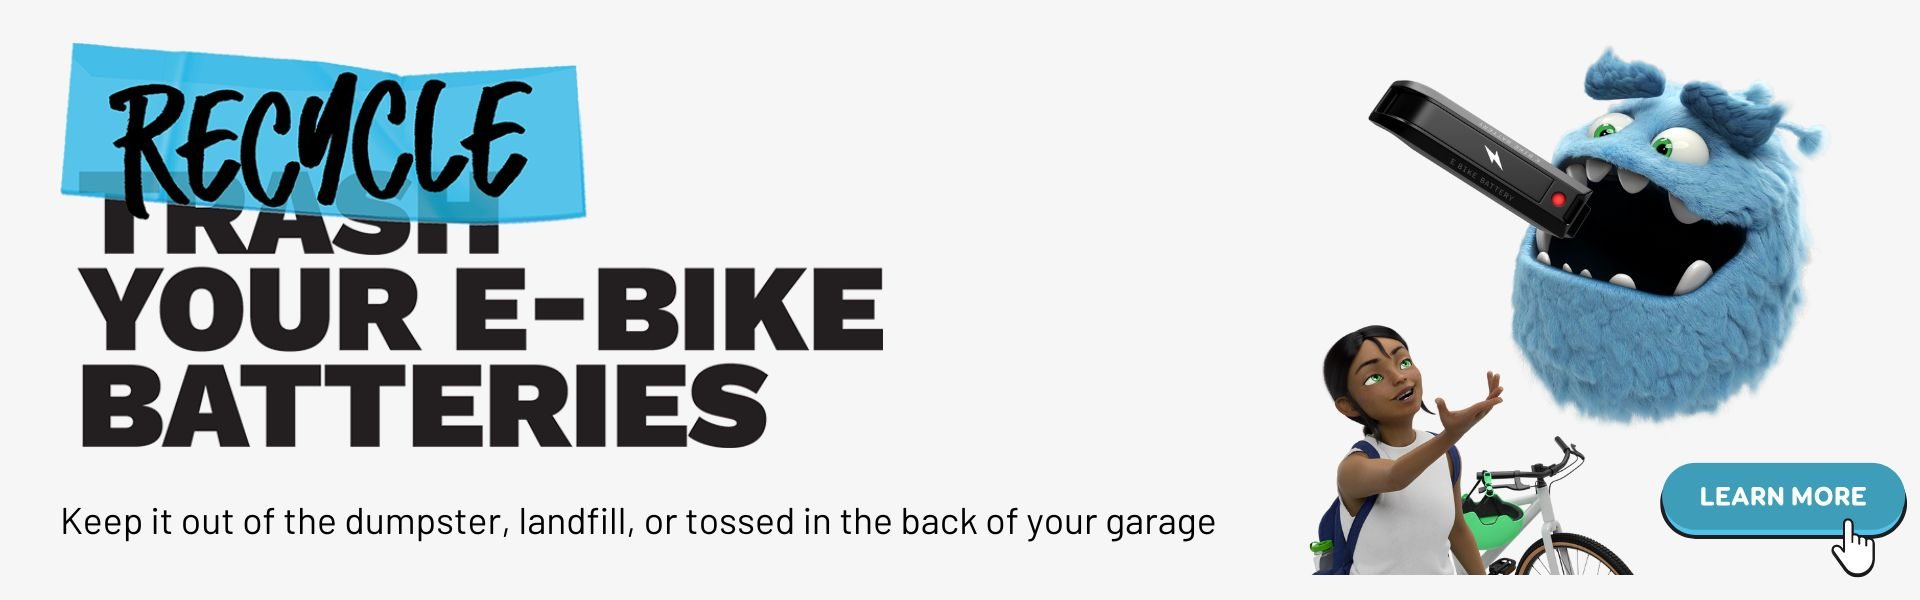 Recycle your E-Bike Batteries at Suburban Sports - Keep it out of the dumpster, landfill, or tossed in the back of your garage.